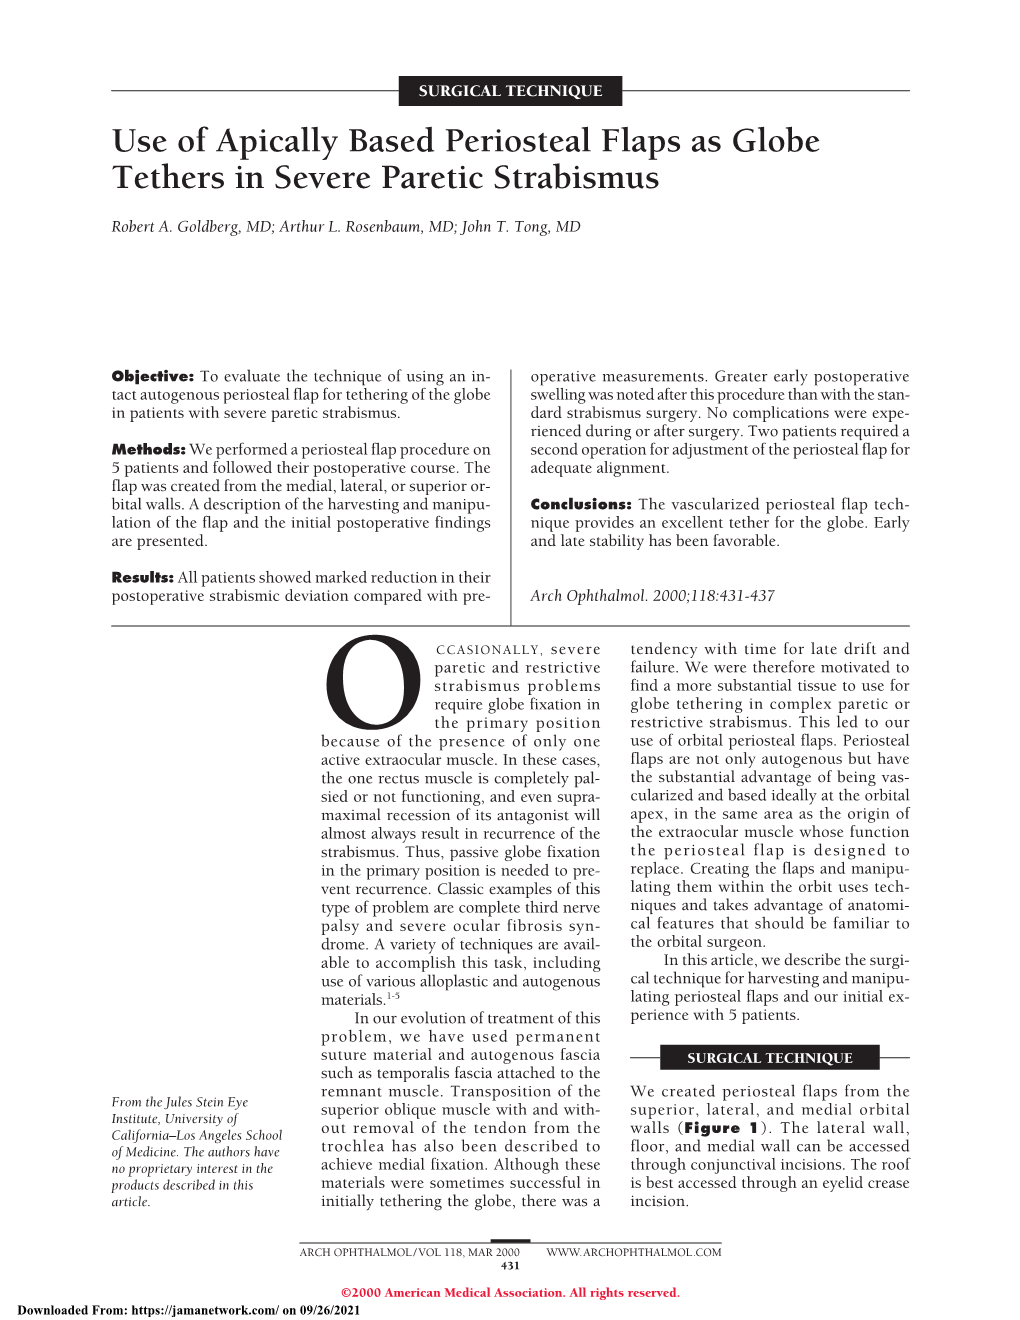 Use of Apically Based Periosteal Flaps As Globe Tethers in Severe Paretic Strabismus